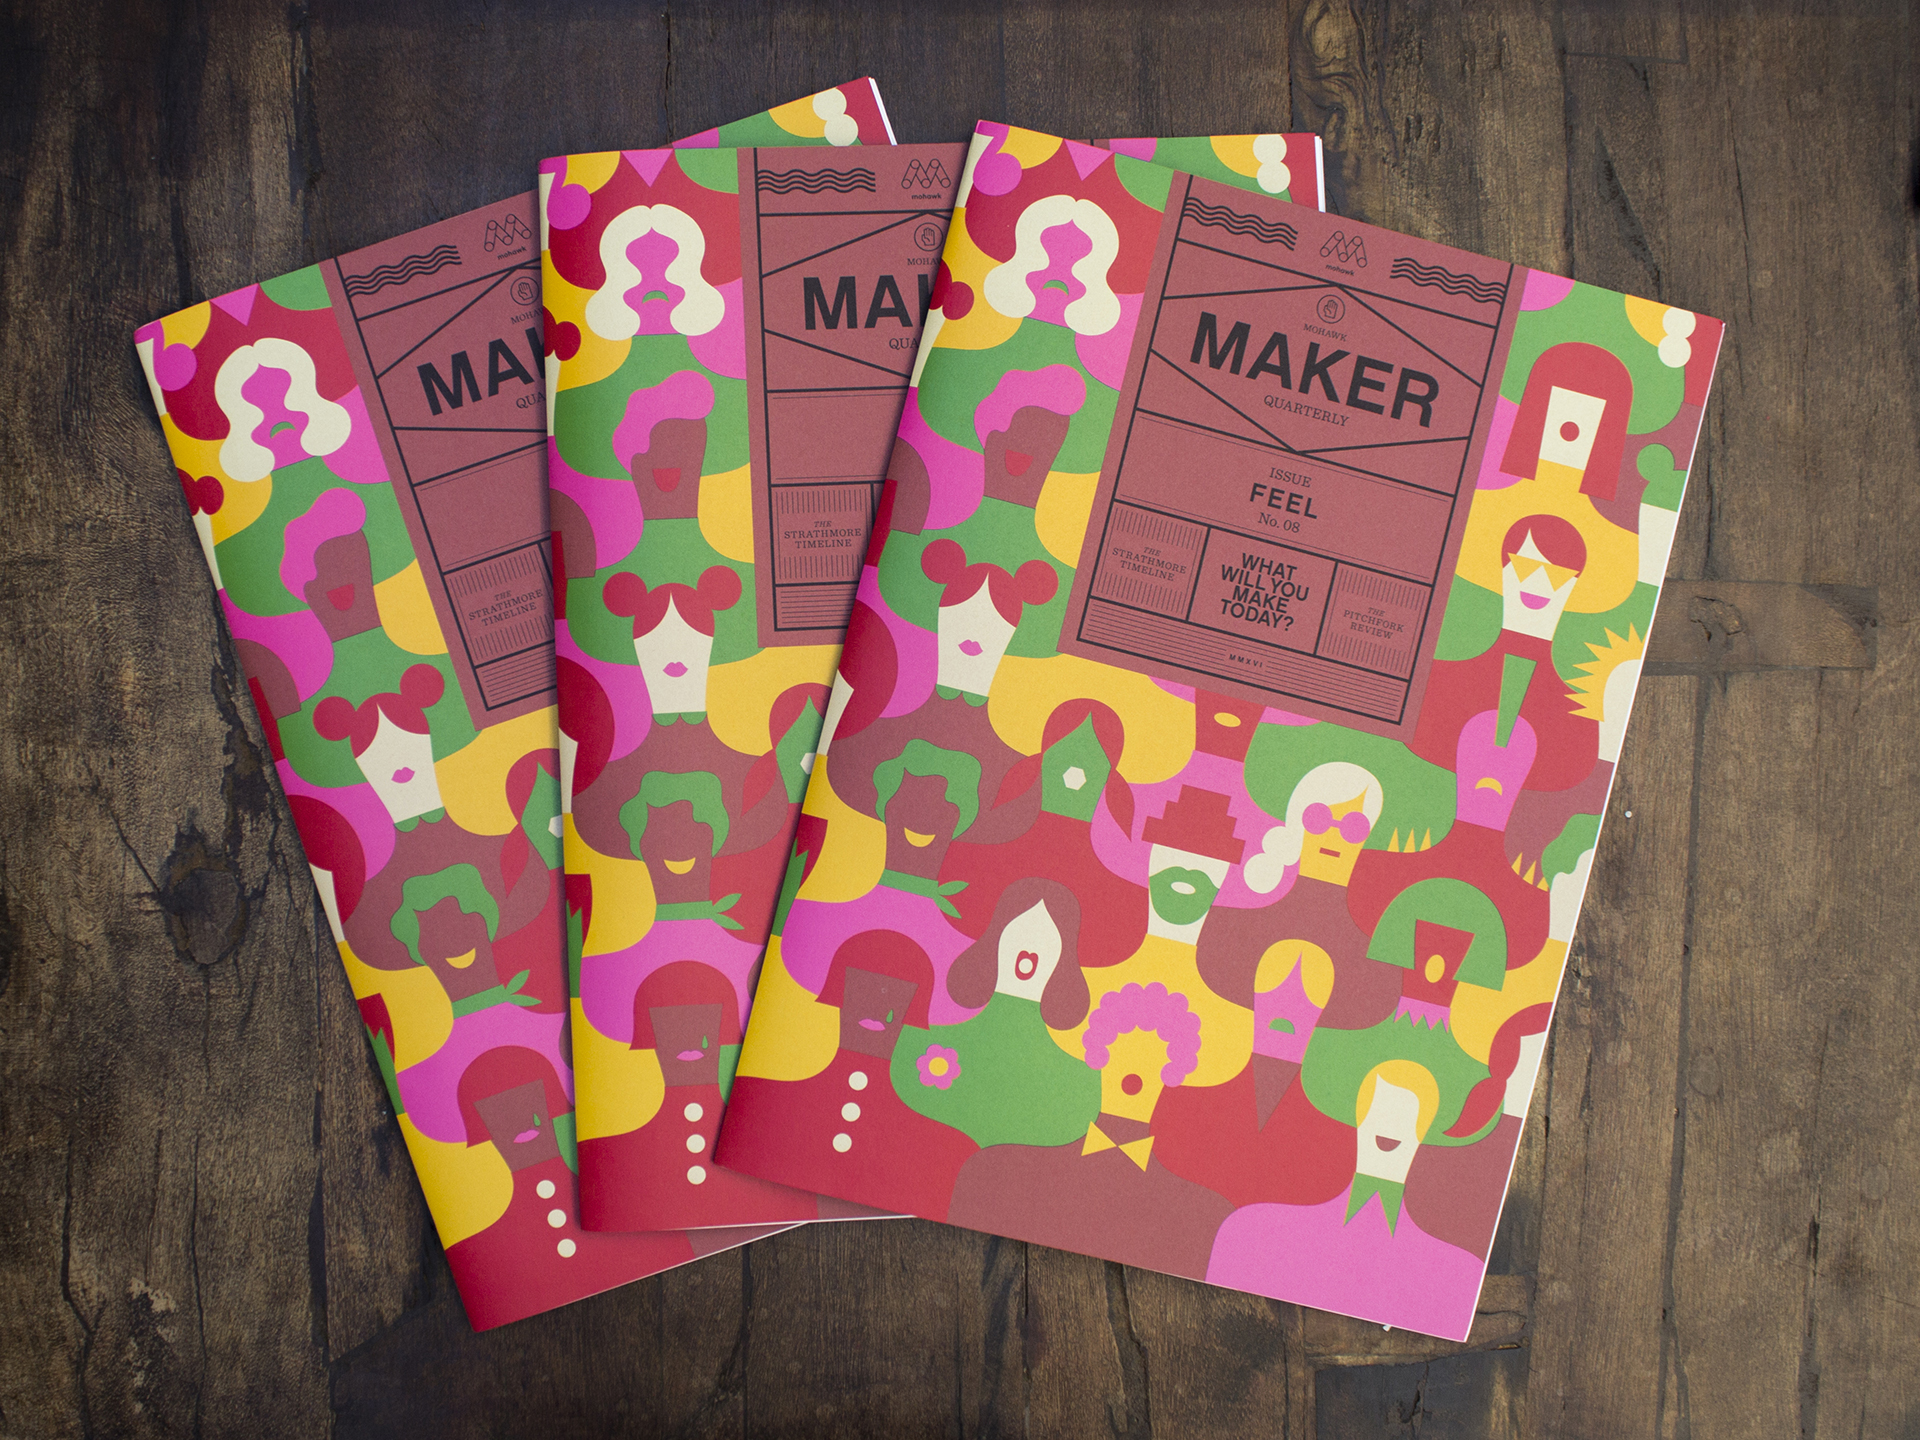 Several Maker Quarterly issues laid out on a wood table